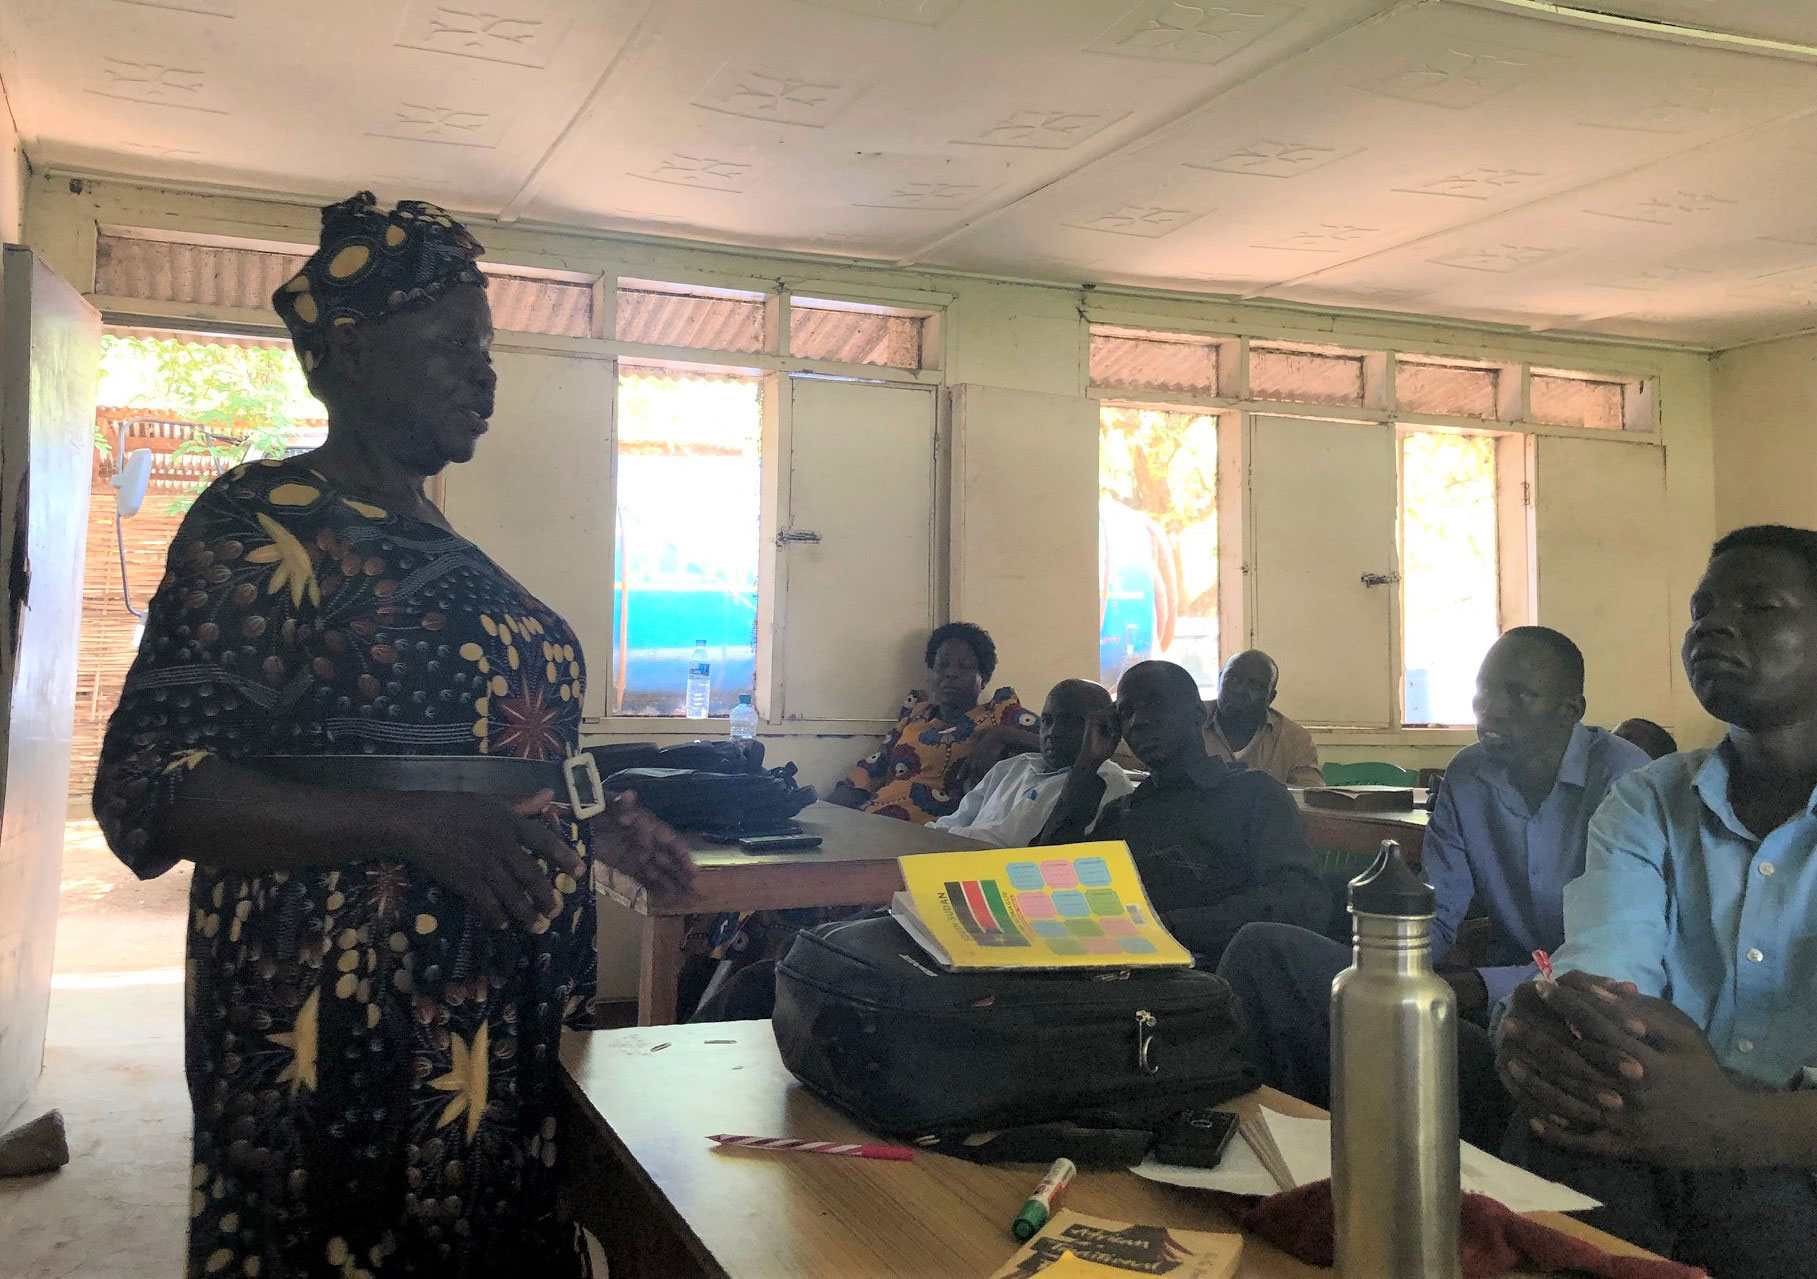 Sarah Jacob presents to the class on behalf of her group on the role of rainmakers according to African Traditional Religion (ATR).